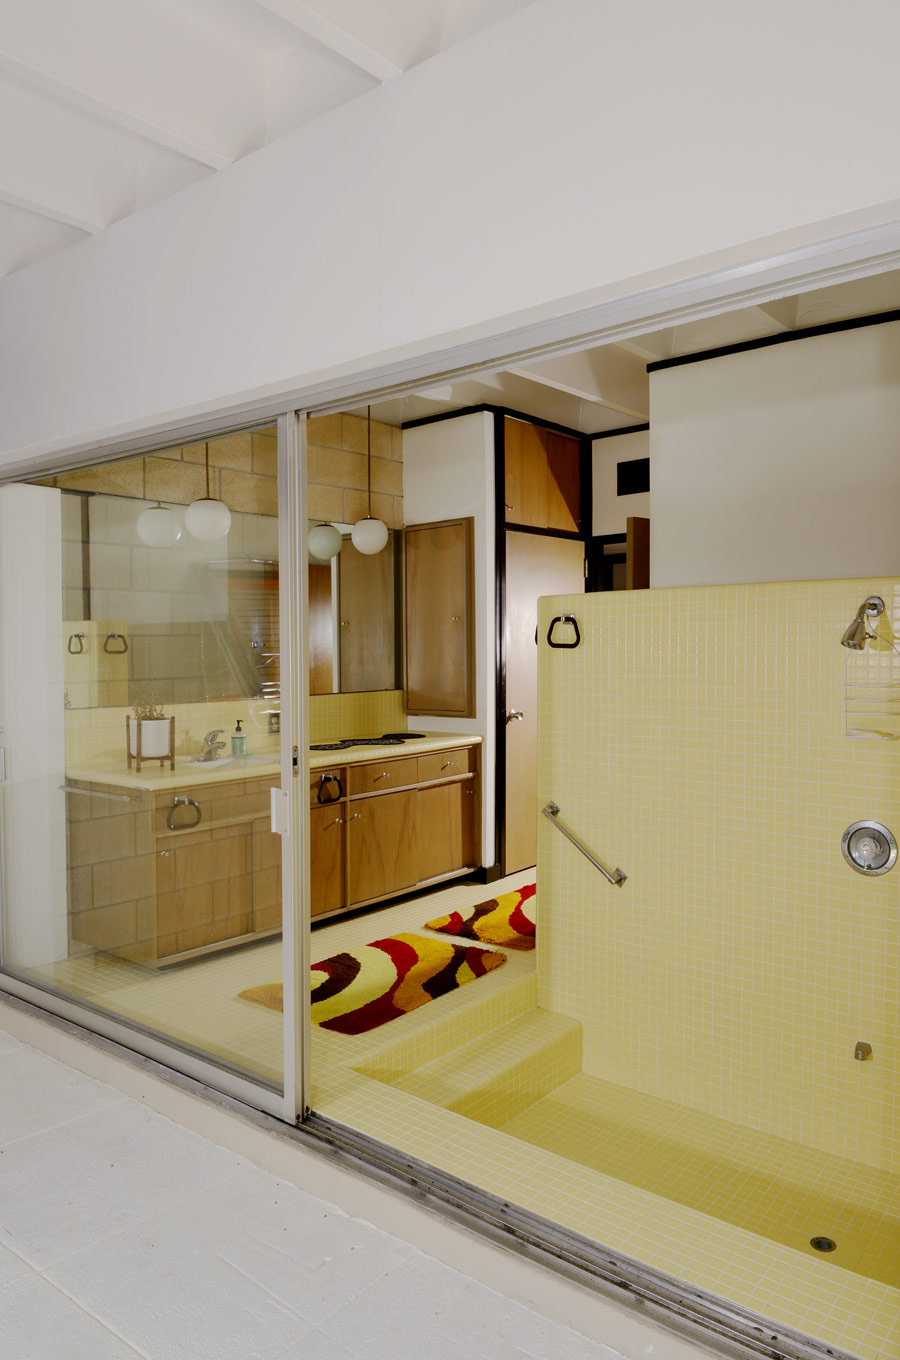 The master bathroom is very eye catchy, with yellow tuiles and brown wooden furniture plus storage items